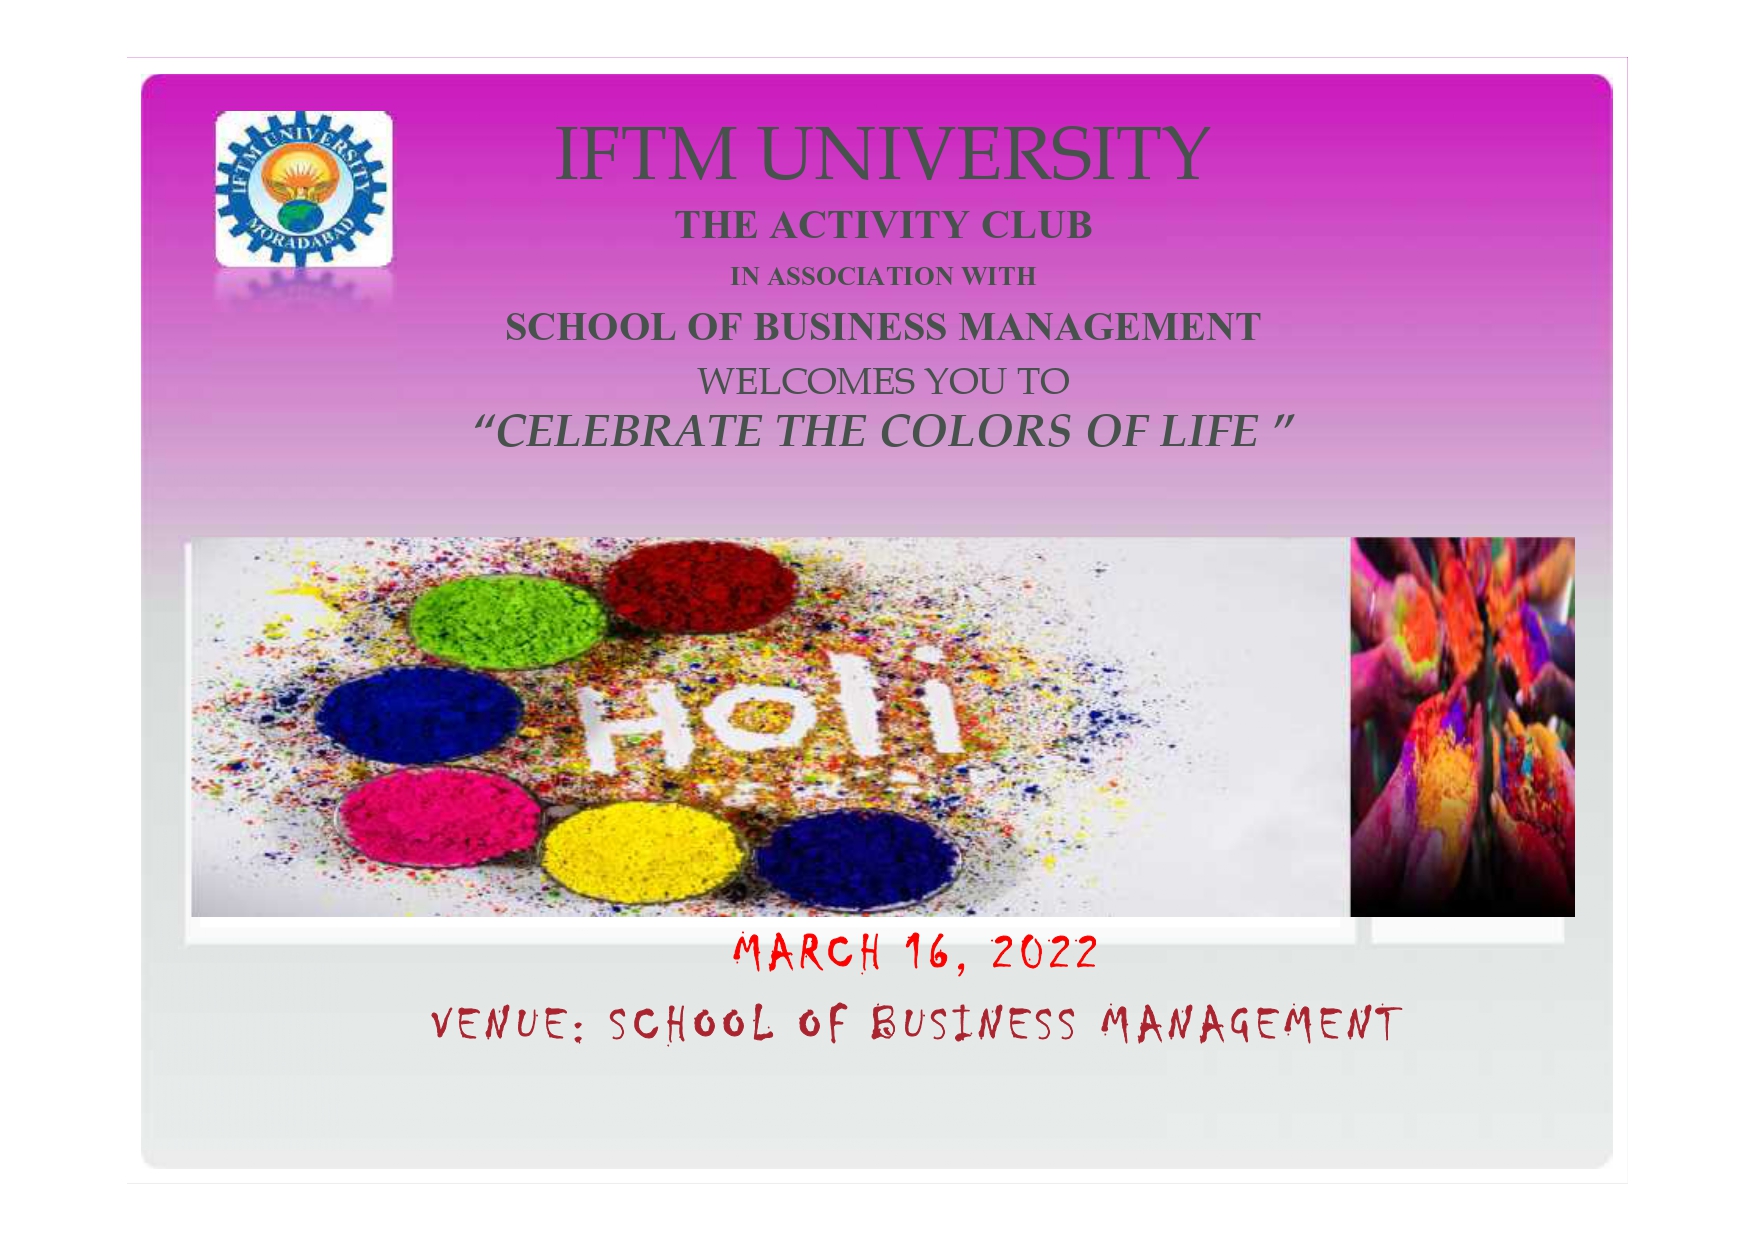 Holi Celebration in association with School of Business Management